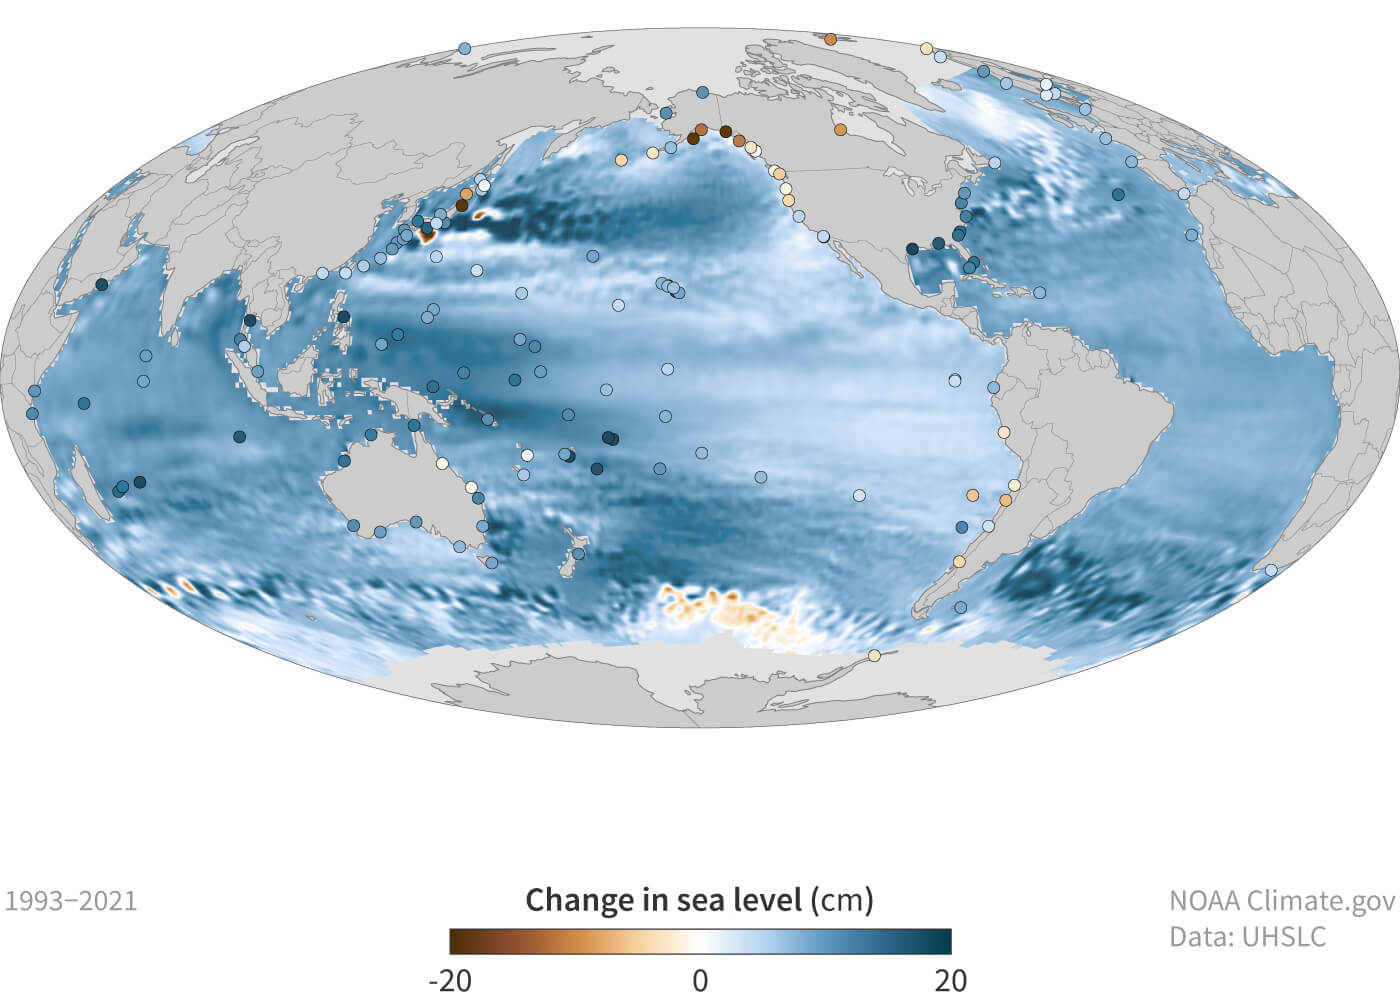 A map of sea level change from 1993 to 2021